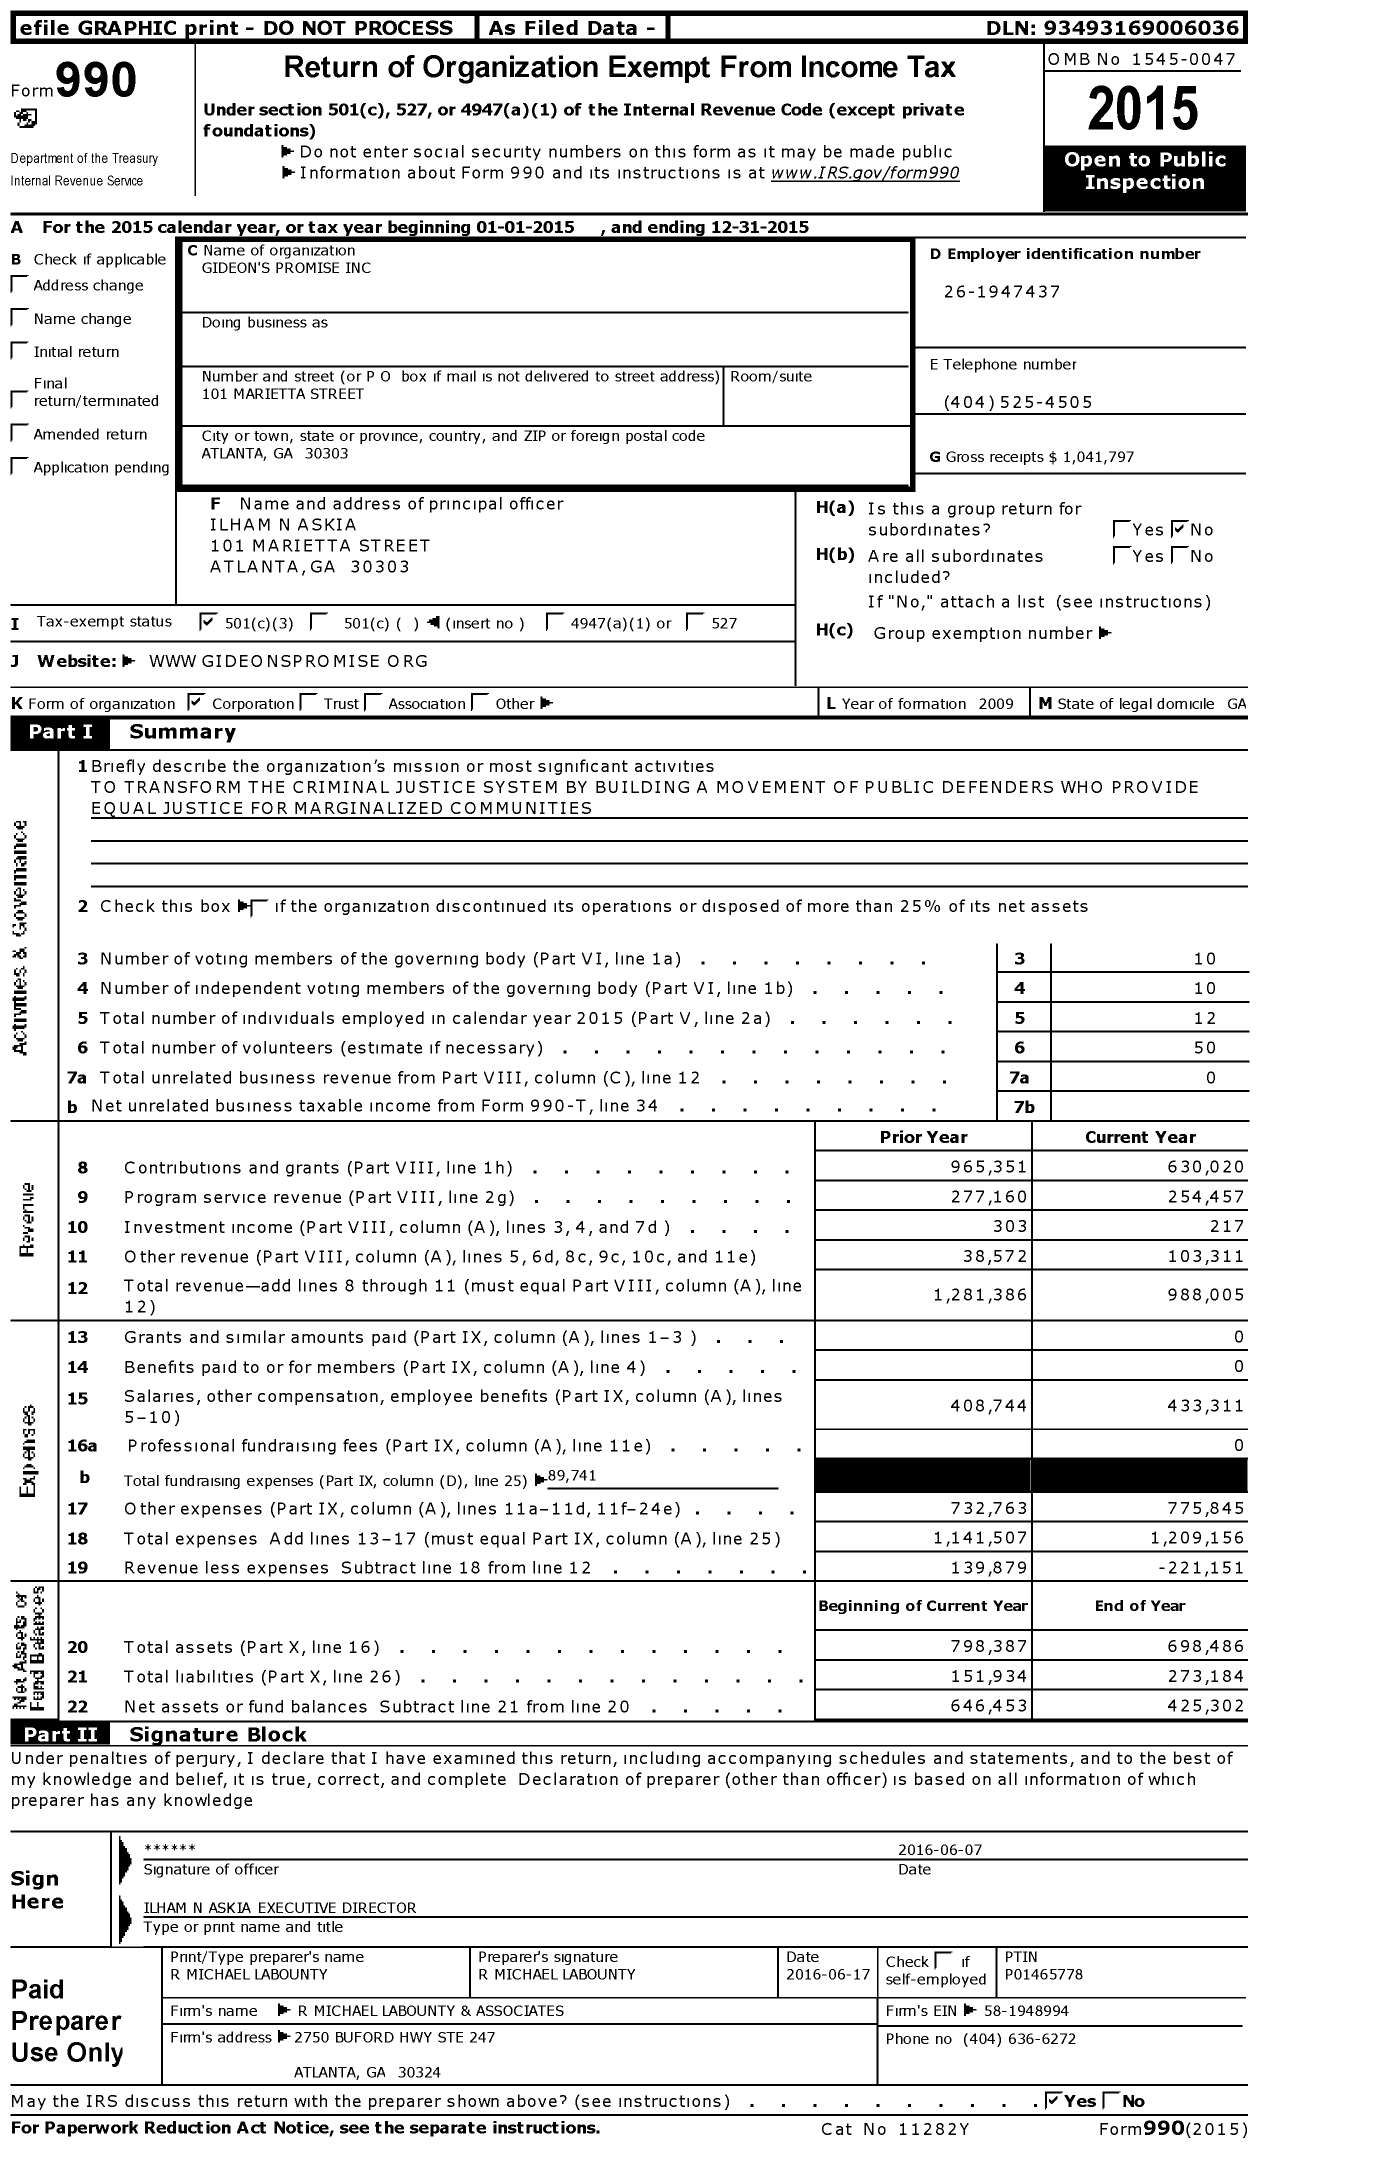 Image of first page of 2015 Form 990 for Gideons Promise